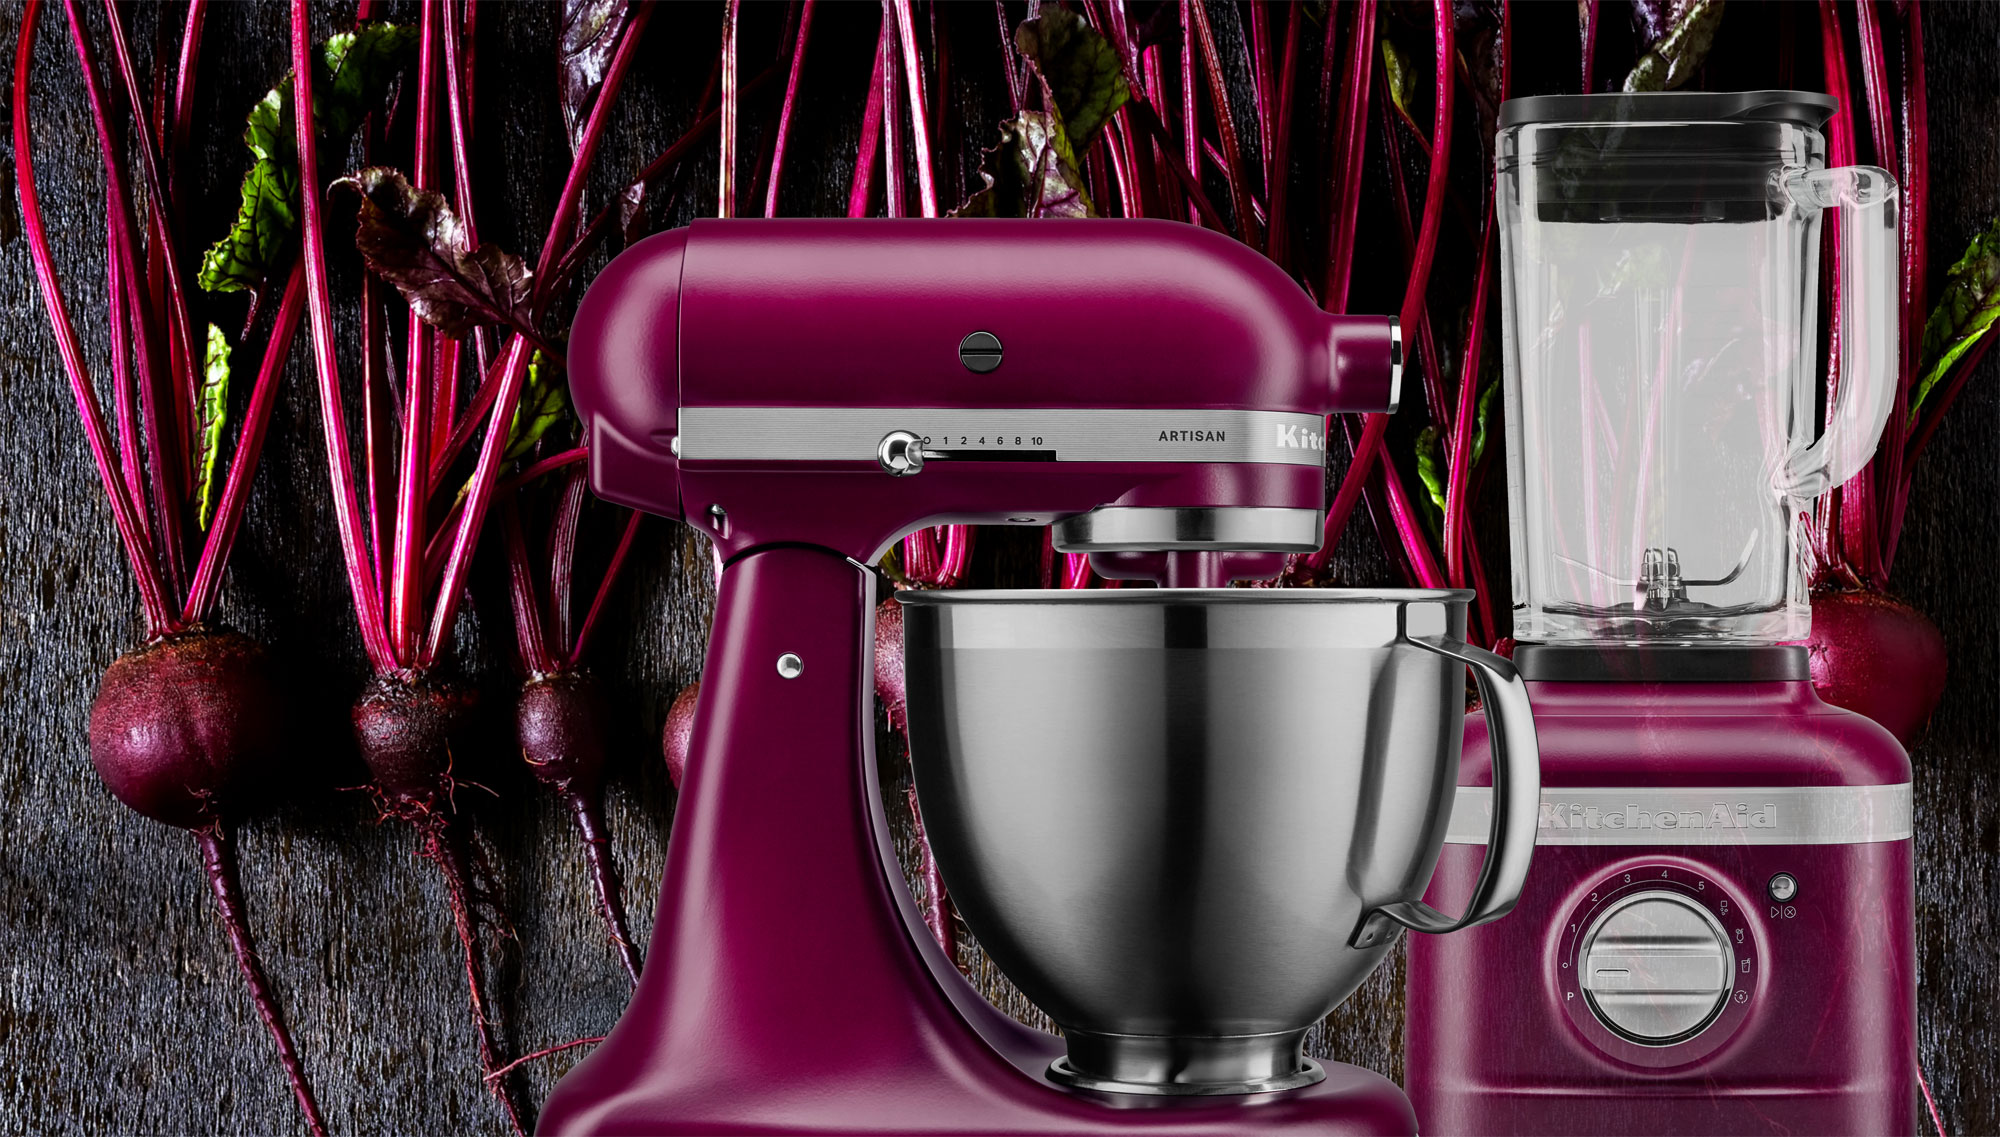 https://www.luxuriousmagazine.com/wp-content/uploads/2022/03/The-KitchenAid-Colour-of-the-Year-for-2022-is-Beetroot.jpg